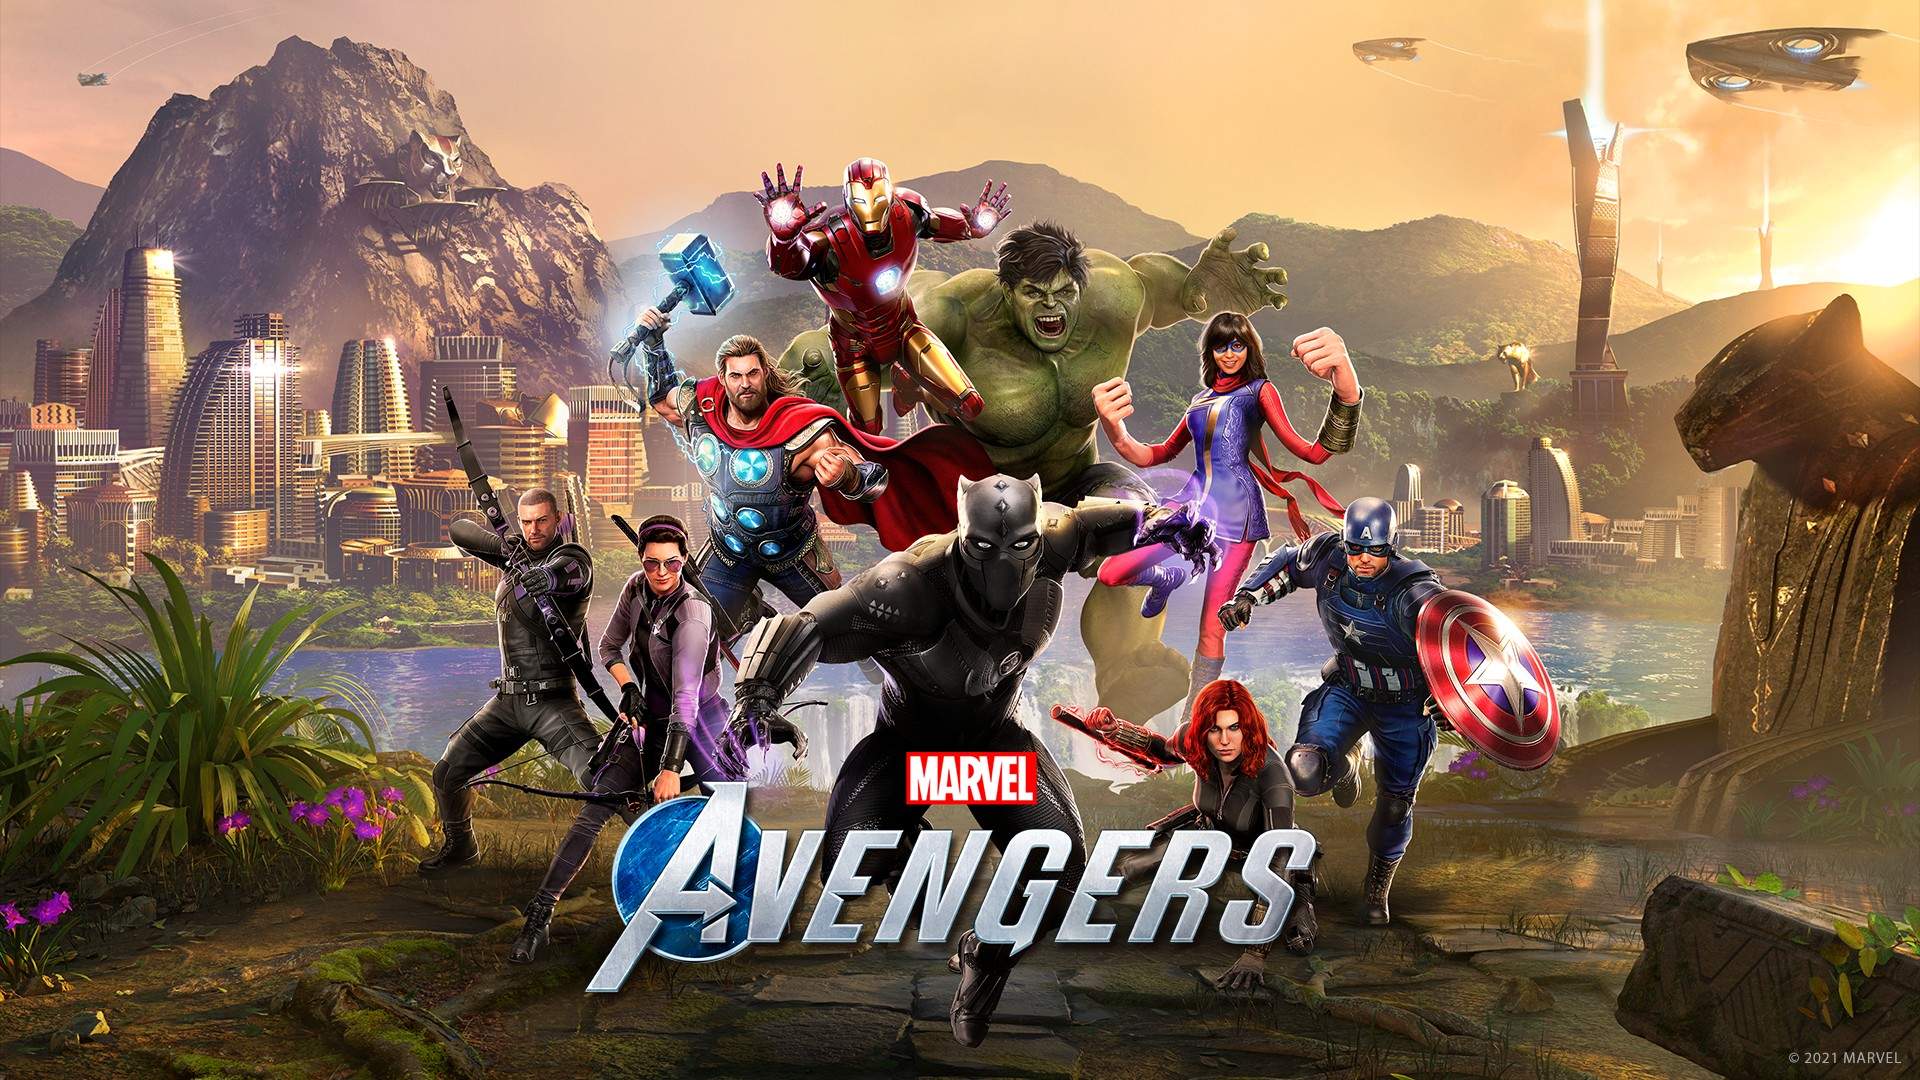 Image for Marvel's Avengers is coming to Game Pass this week, including PC